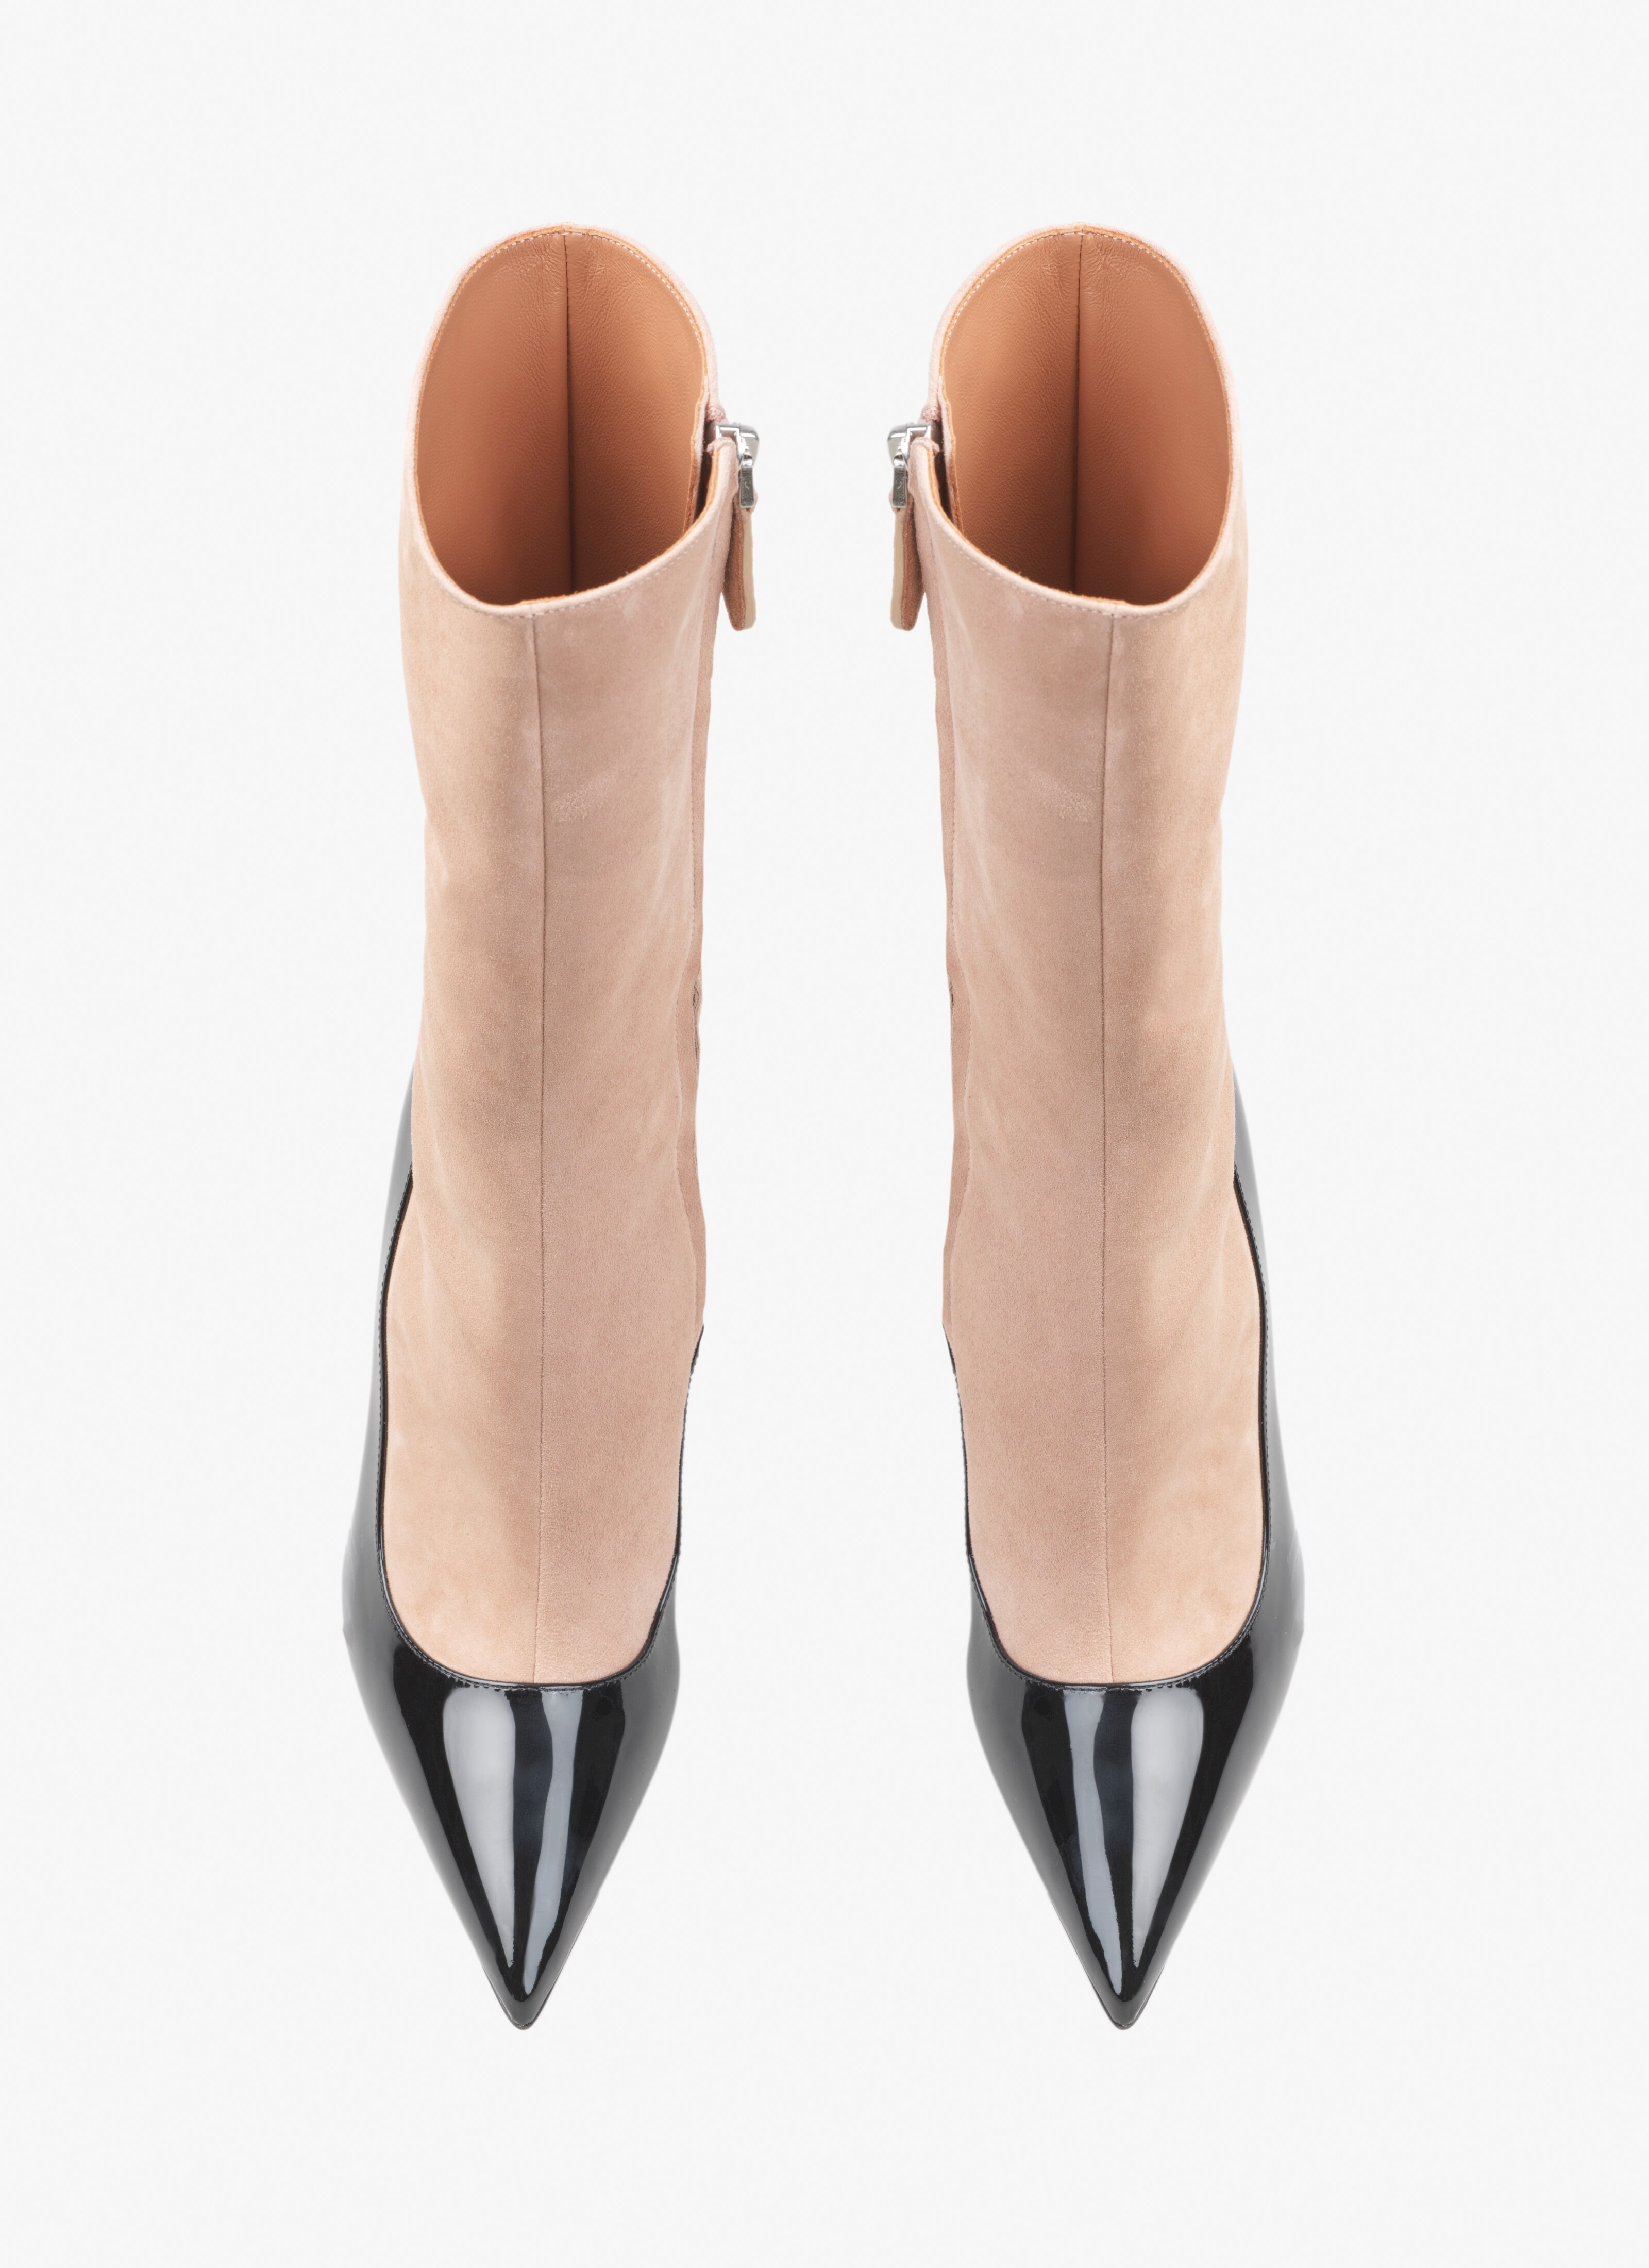 ANKLE BOOTS IN SUEDE GOATSKIN AND PATENT CALFSKIN - 2